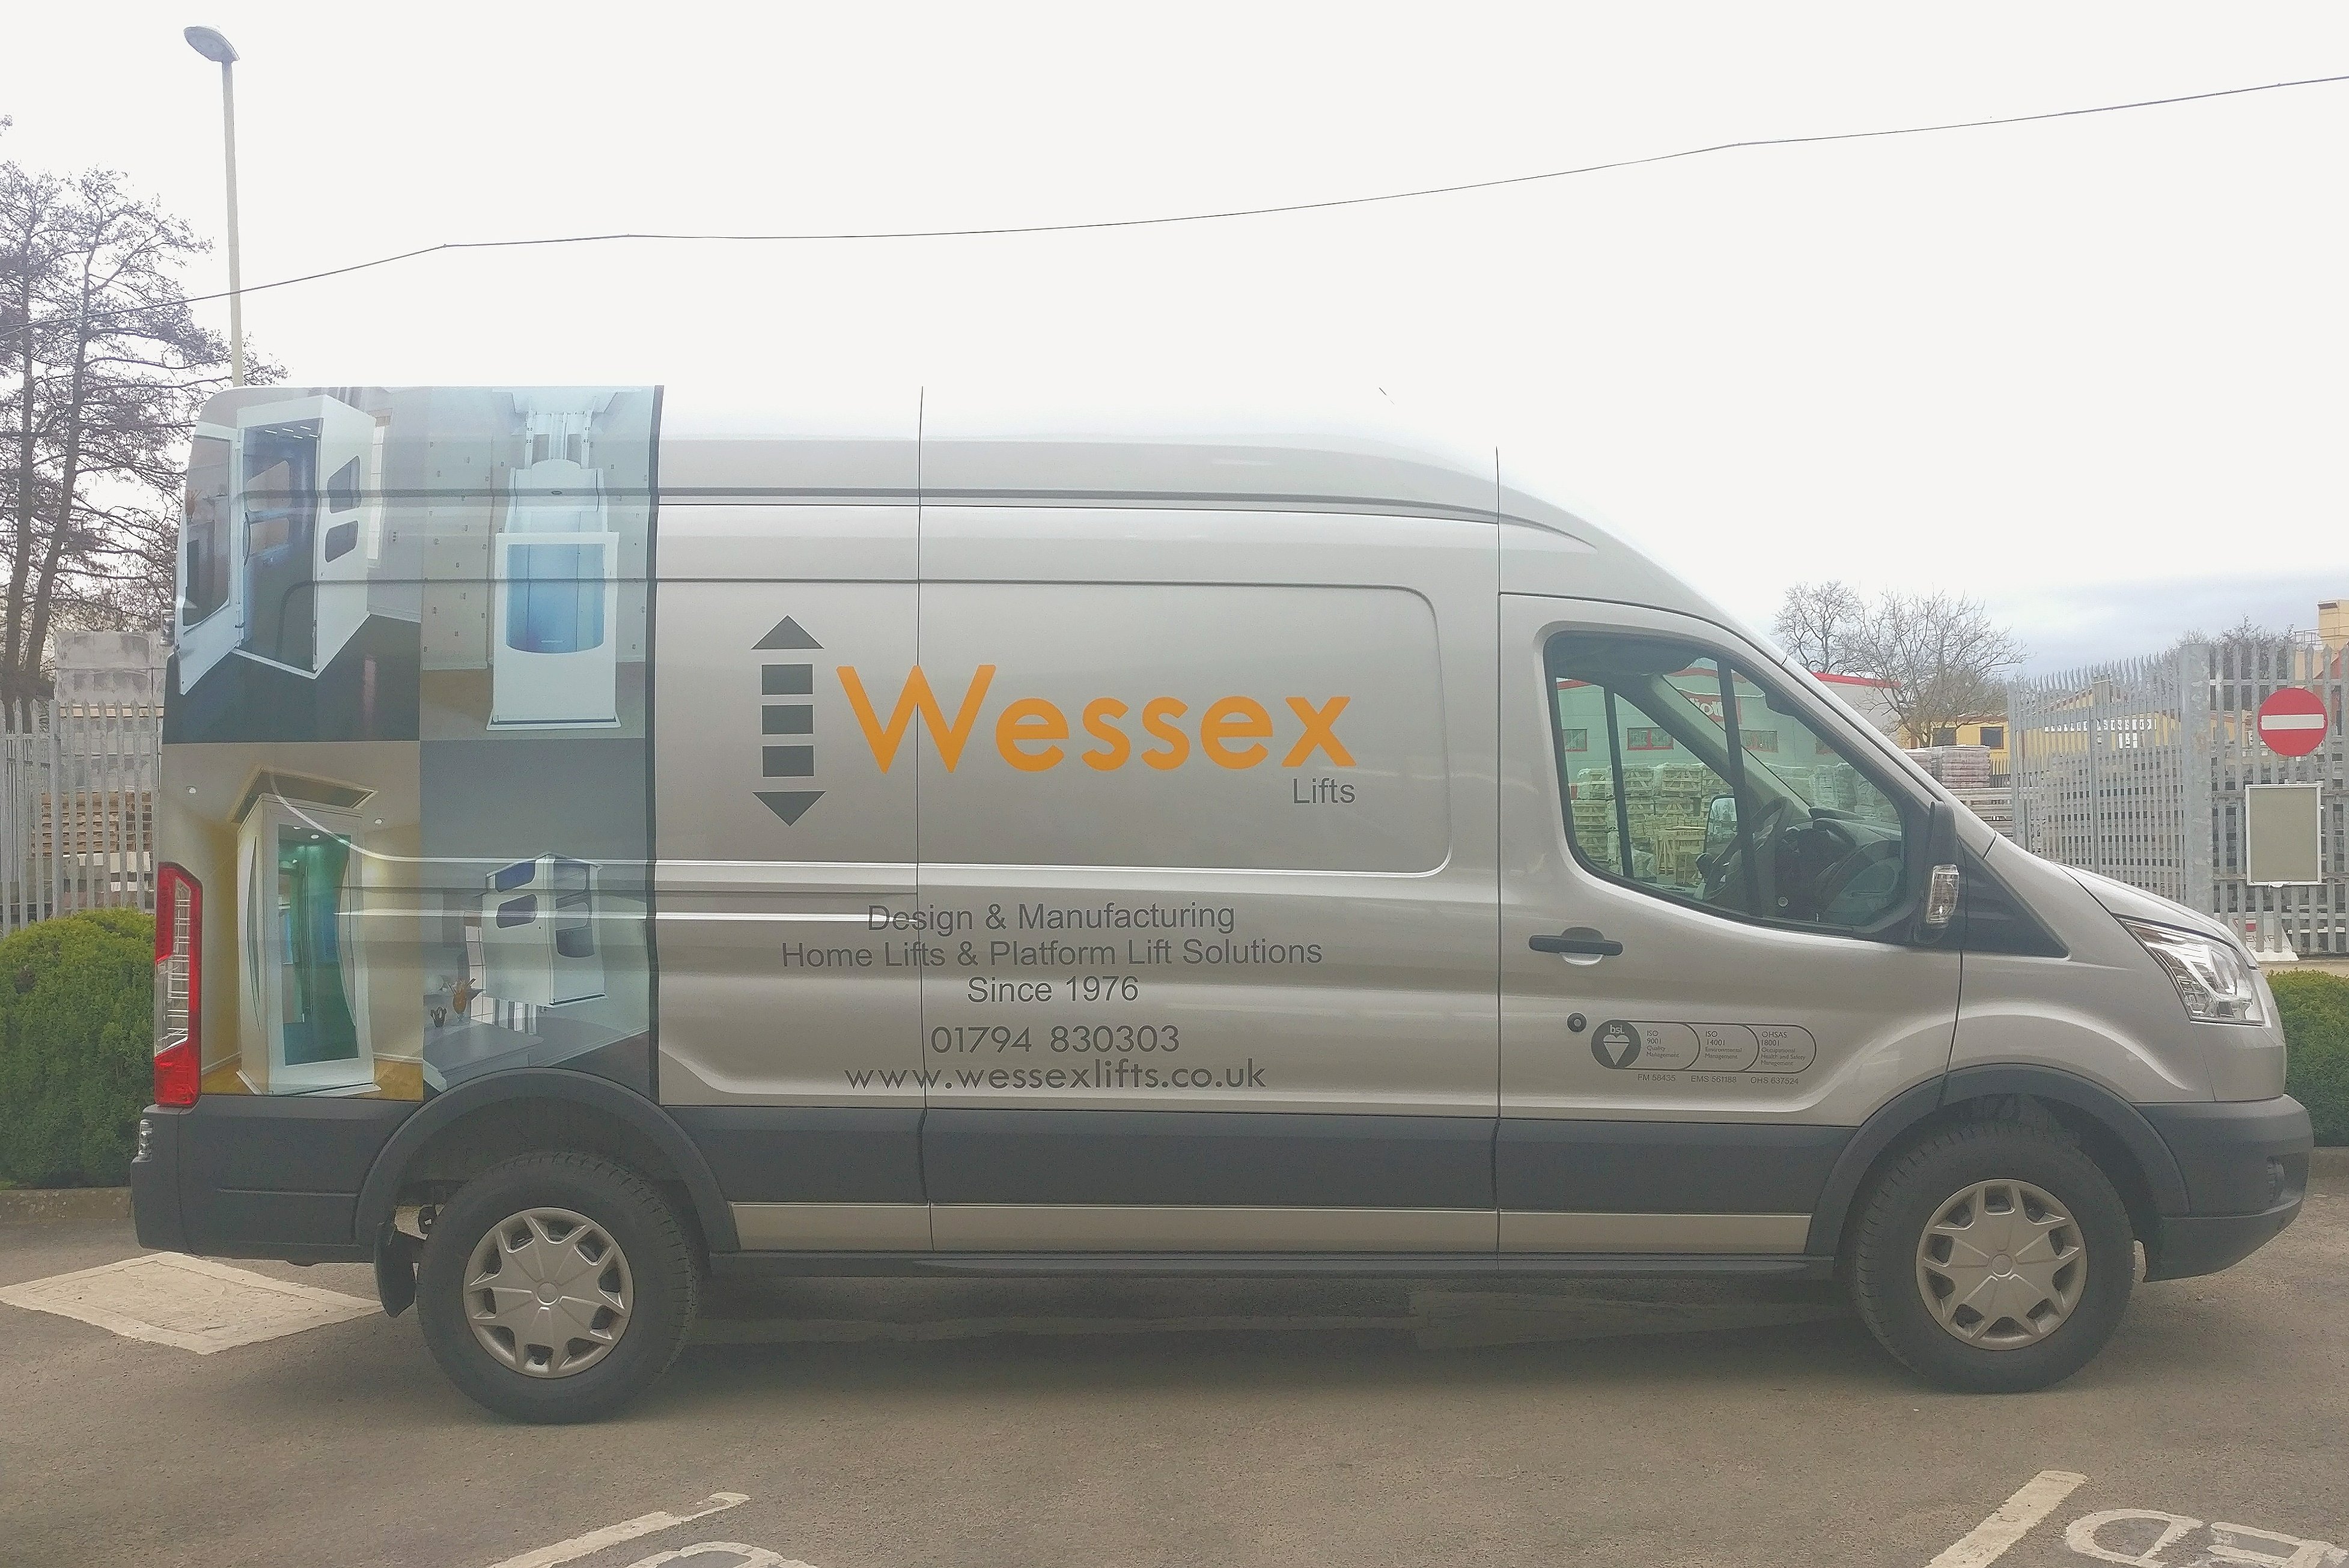 The side profile of the new van design, outside our main head office in Romsey